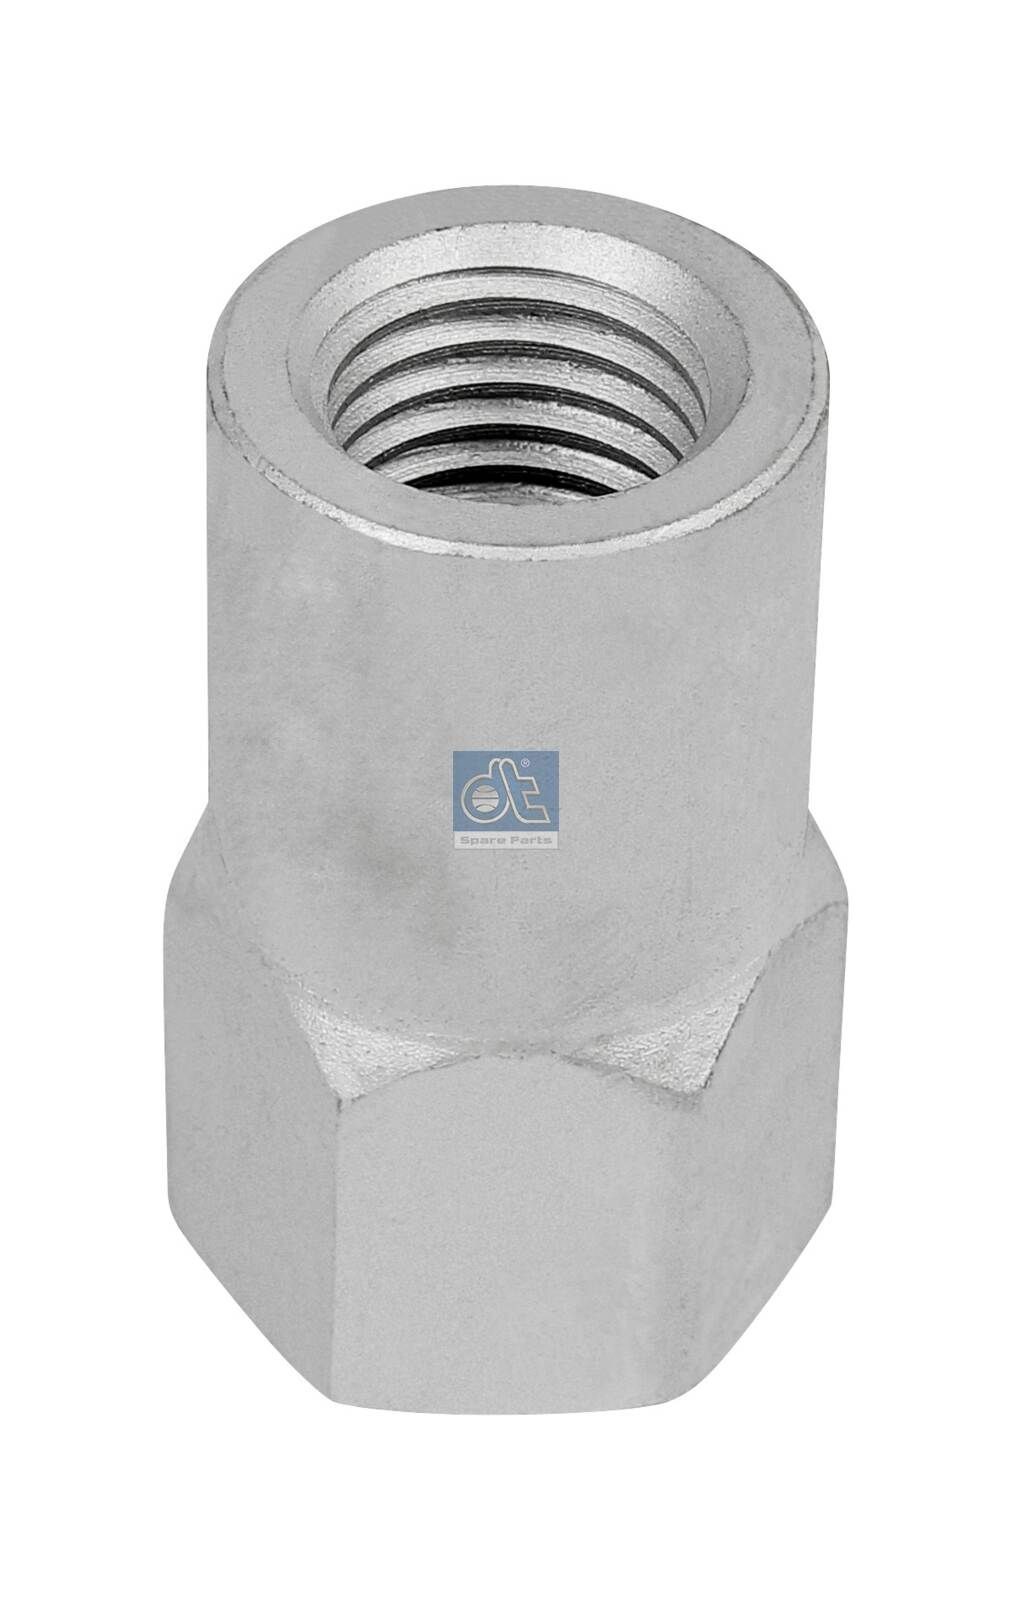 DT Spare Parts 1.25437 Spring Clamp Nut 1 369 805